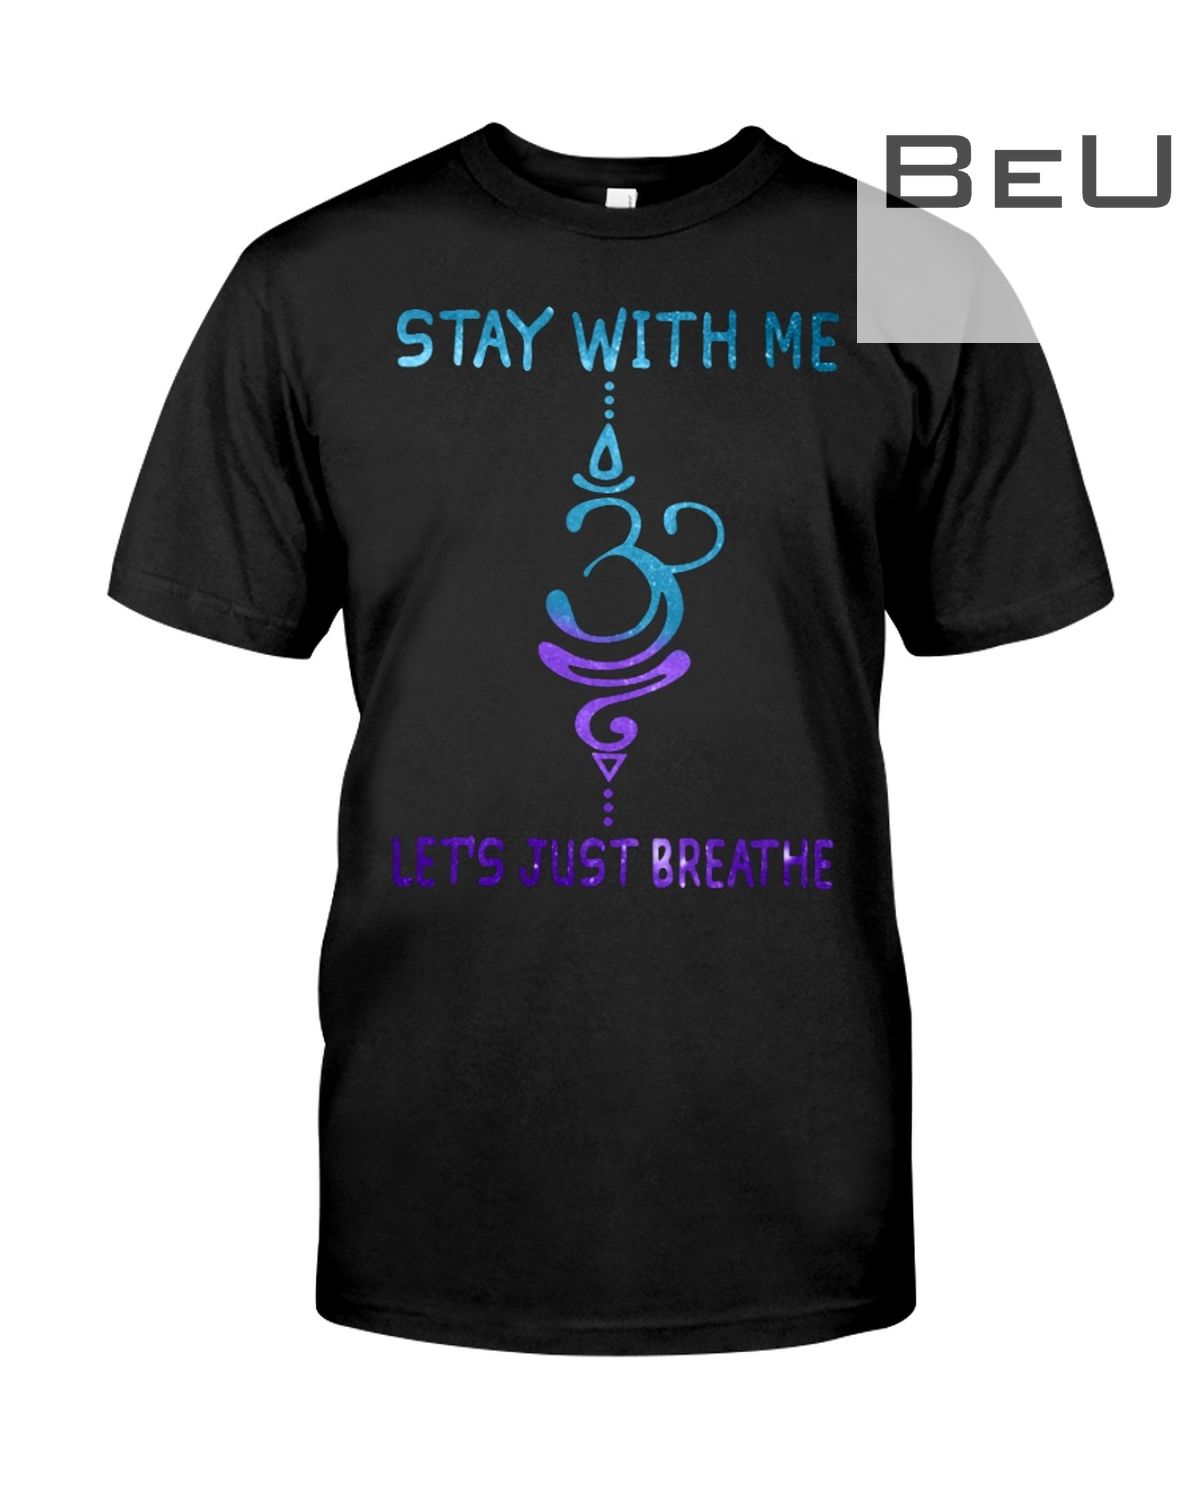 Stay With Me Let's Just Breathe Shirt